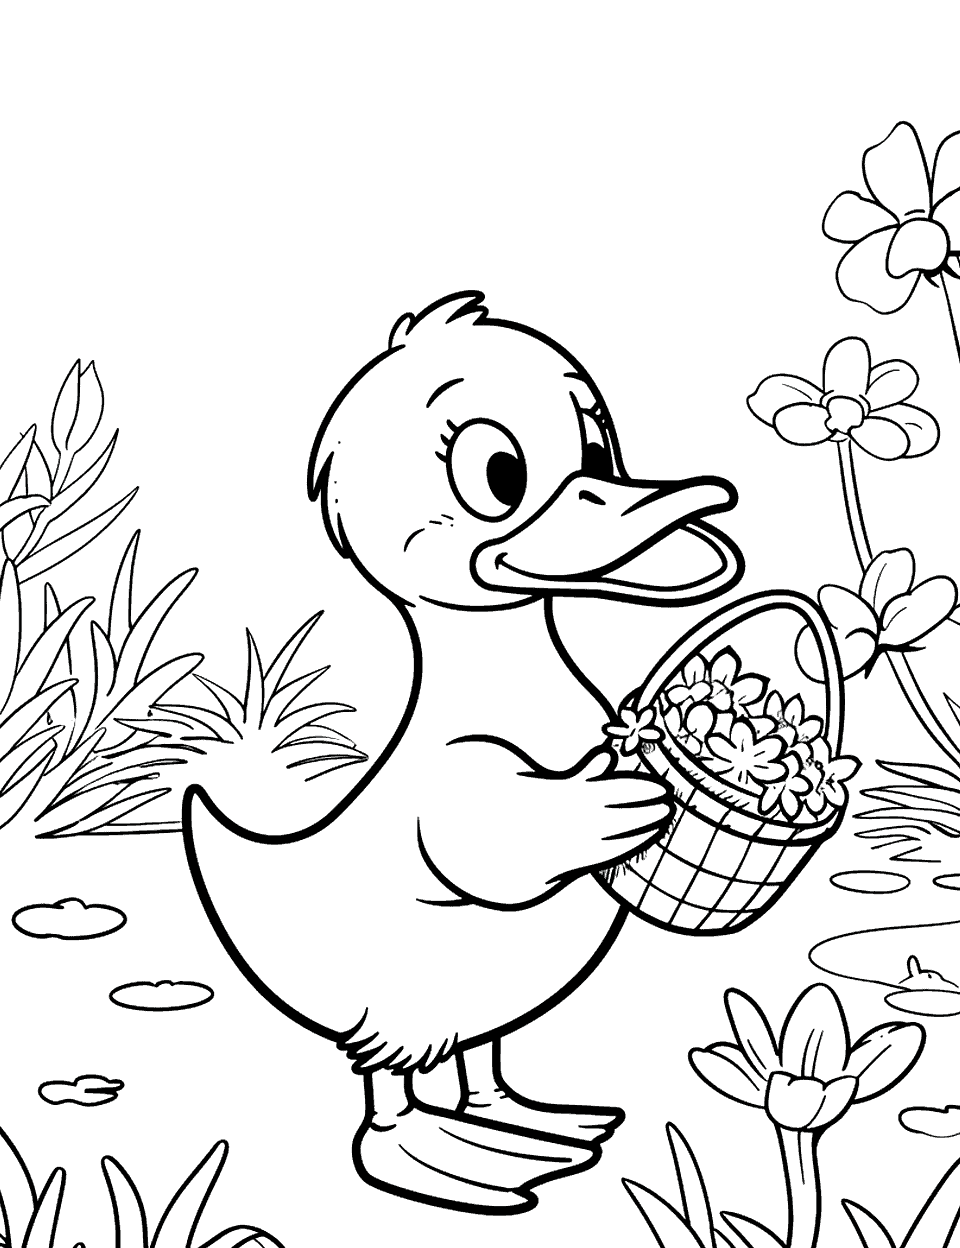 Duck Picking Flowers Coloring Page - Duck in a beautiful garden, picking flowers with a basket.